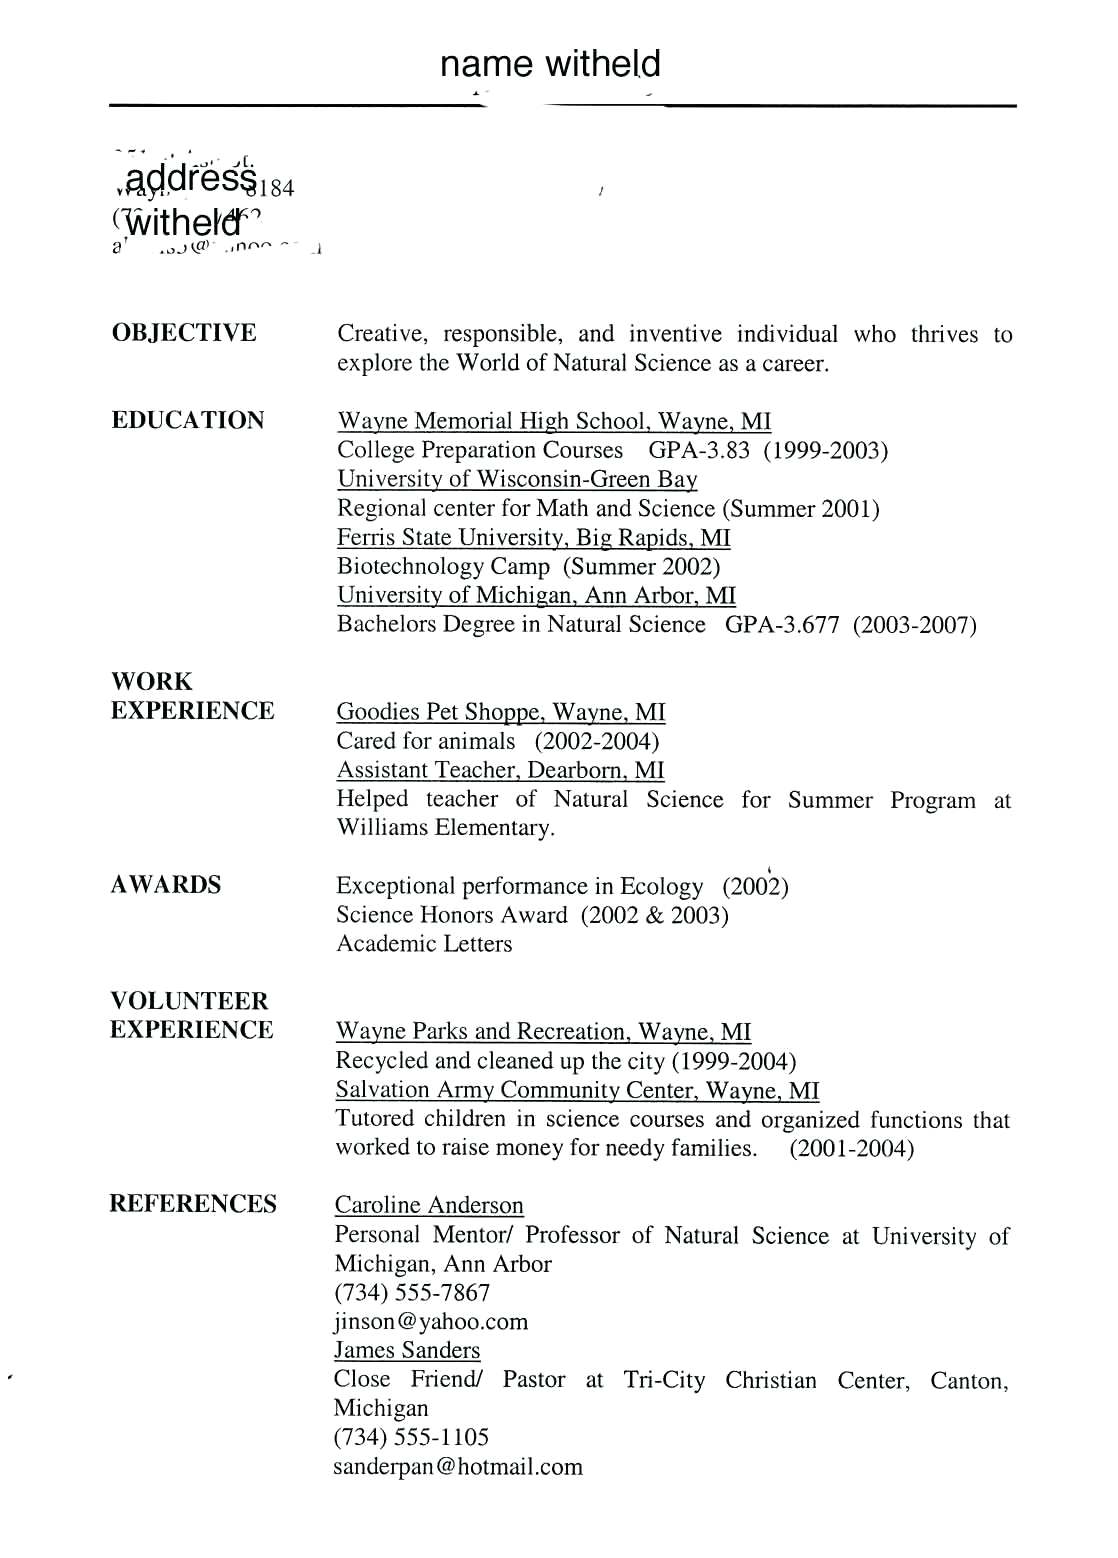 Resume For High School Student College Resume For High School Students Math Essay For Or Against Nuclear Power Buy Mathematics Student Resume Sample Objective Samples Summer Job It Examples Students resume for high school student|wikiresume.com